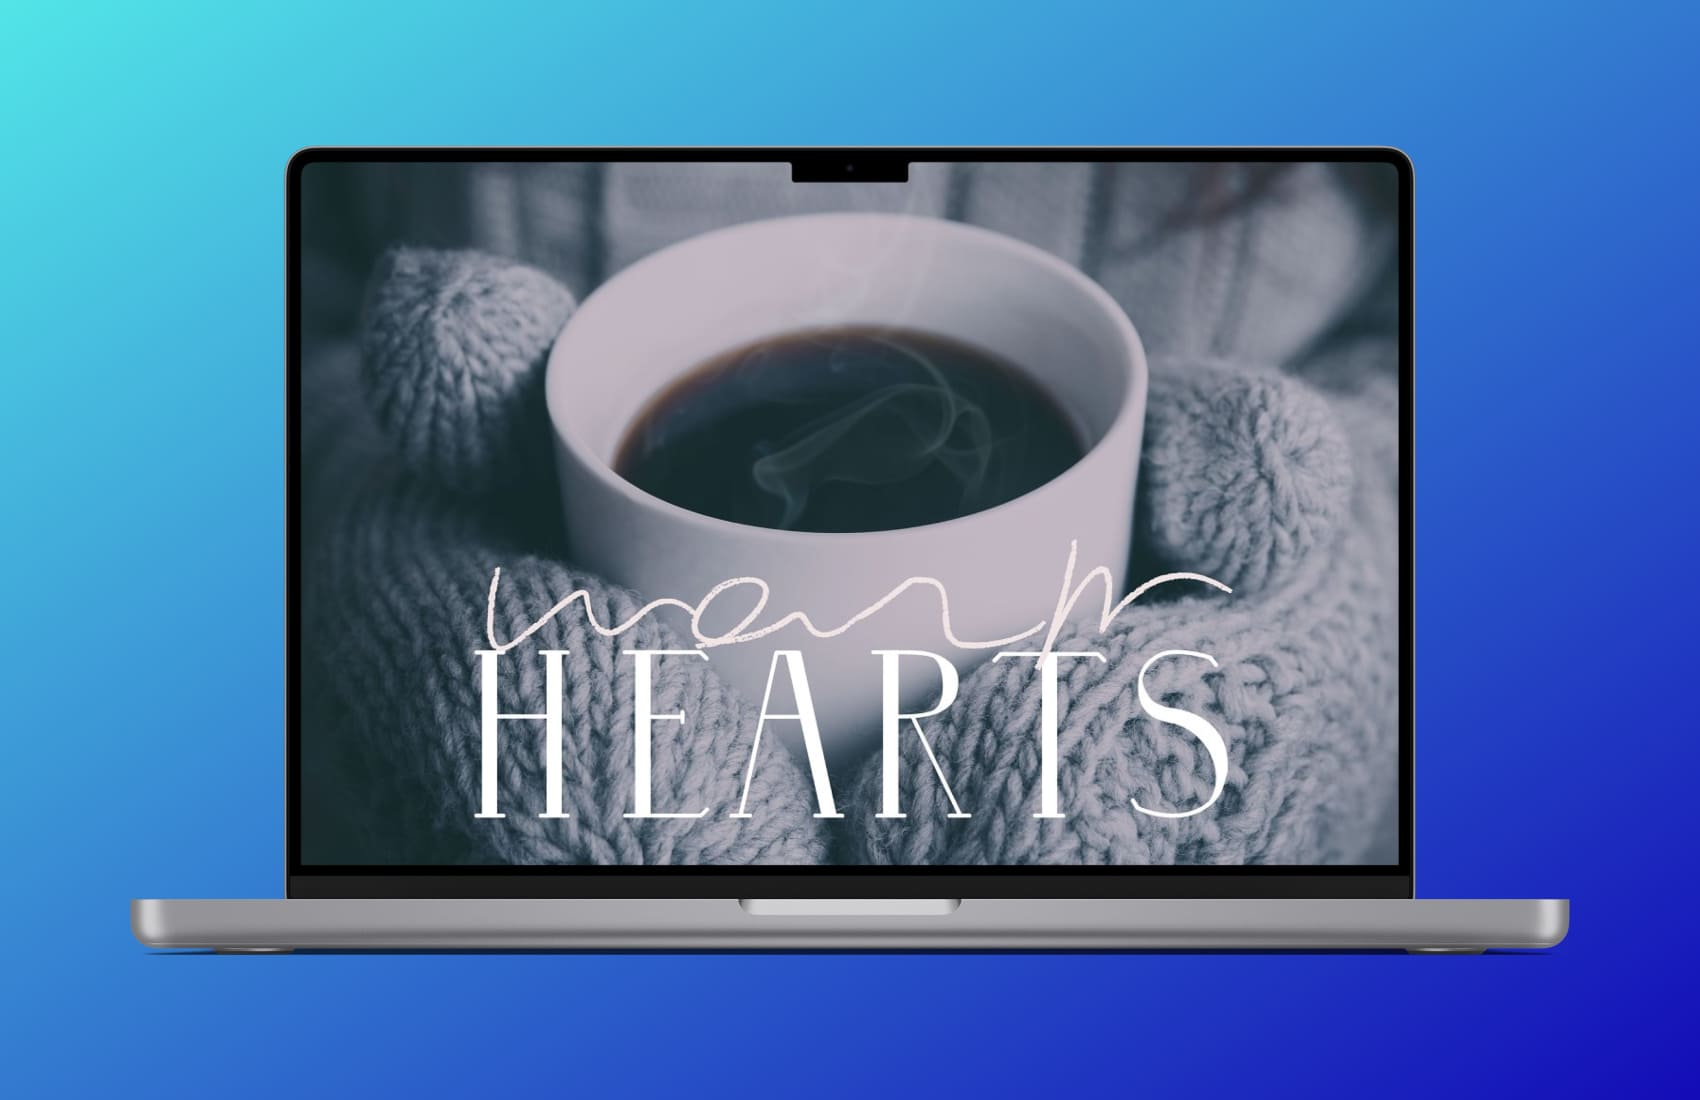 Wintery - A Serif Font Family,"Warm Hearts" On The Laptop.